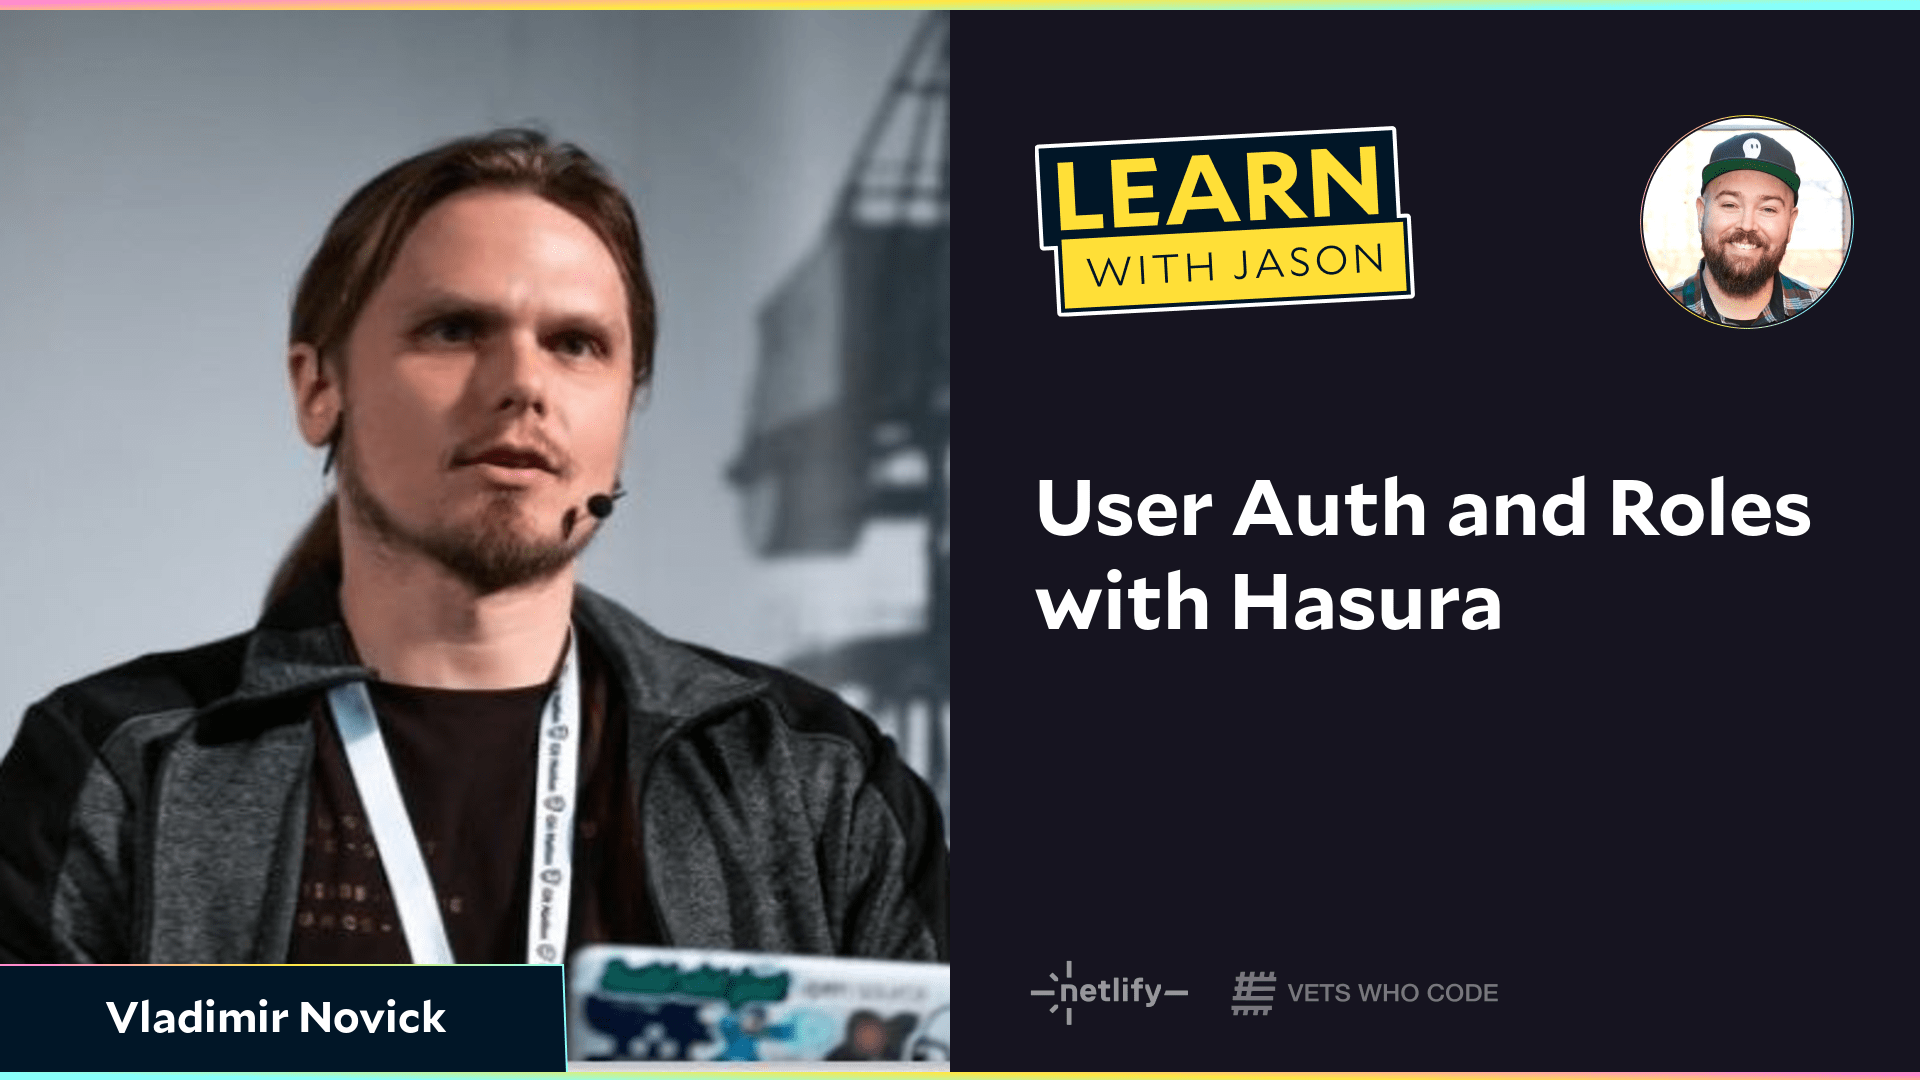 User Auth and Roles with Hasura (with Vladimir Novick)